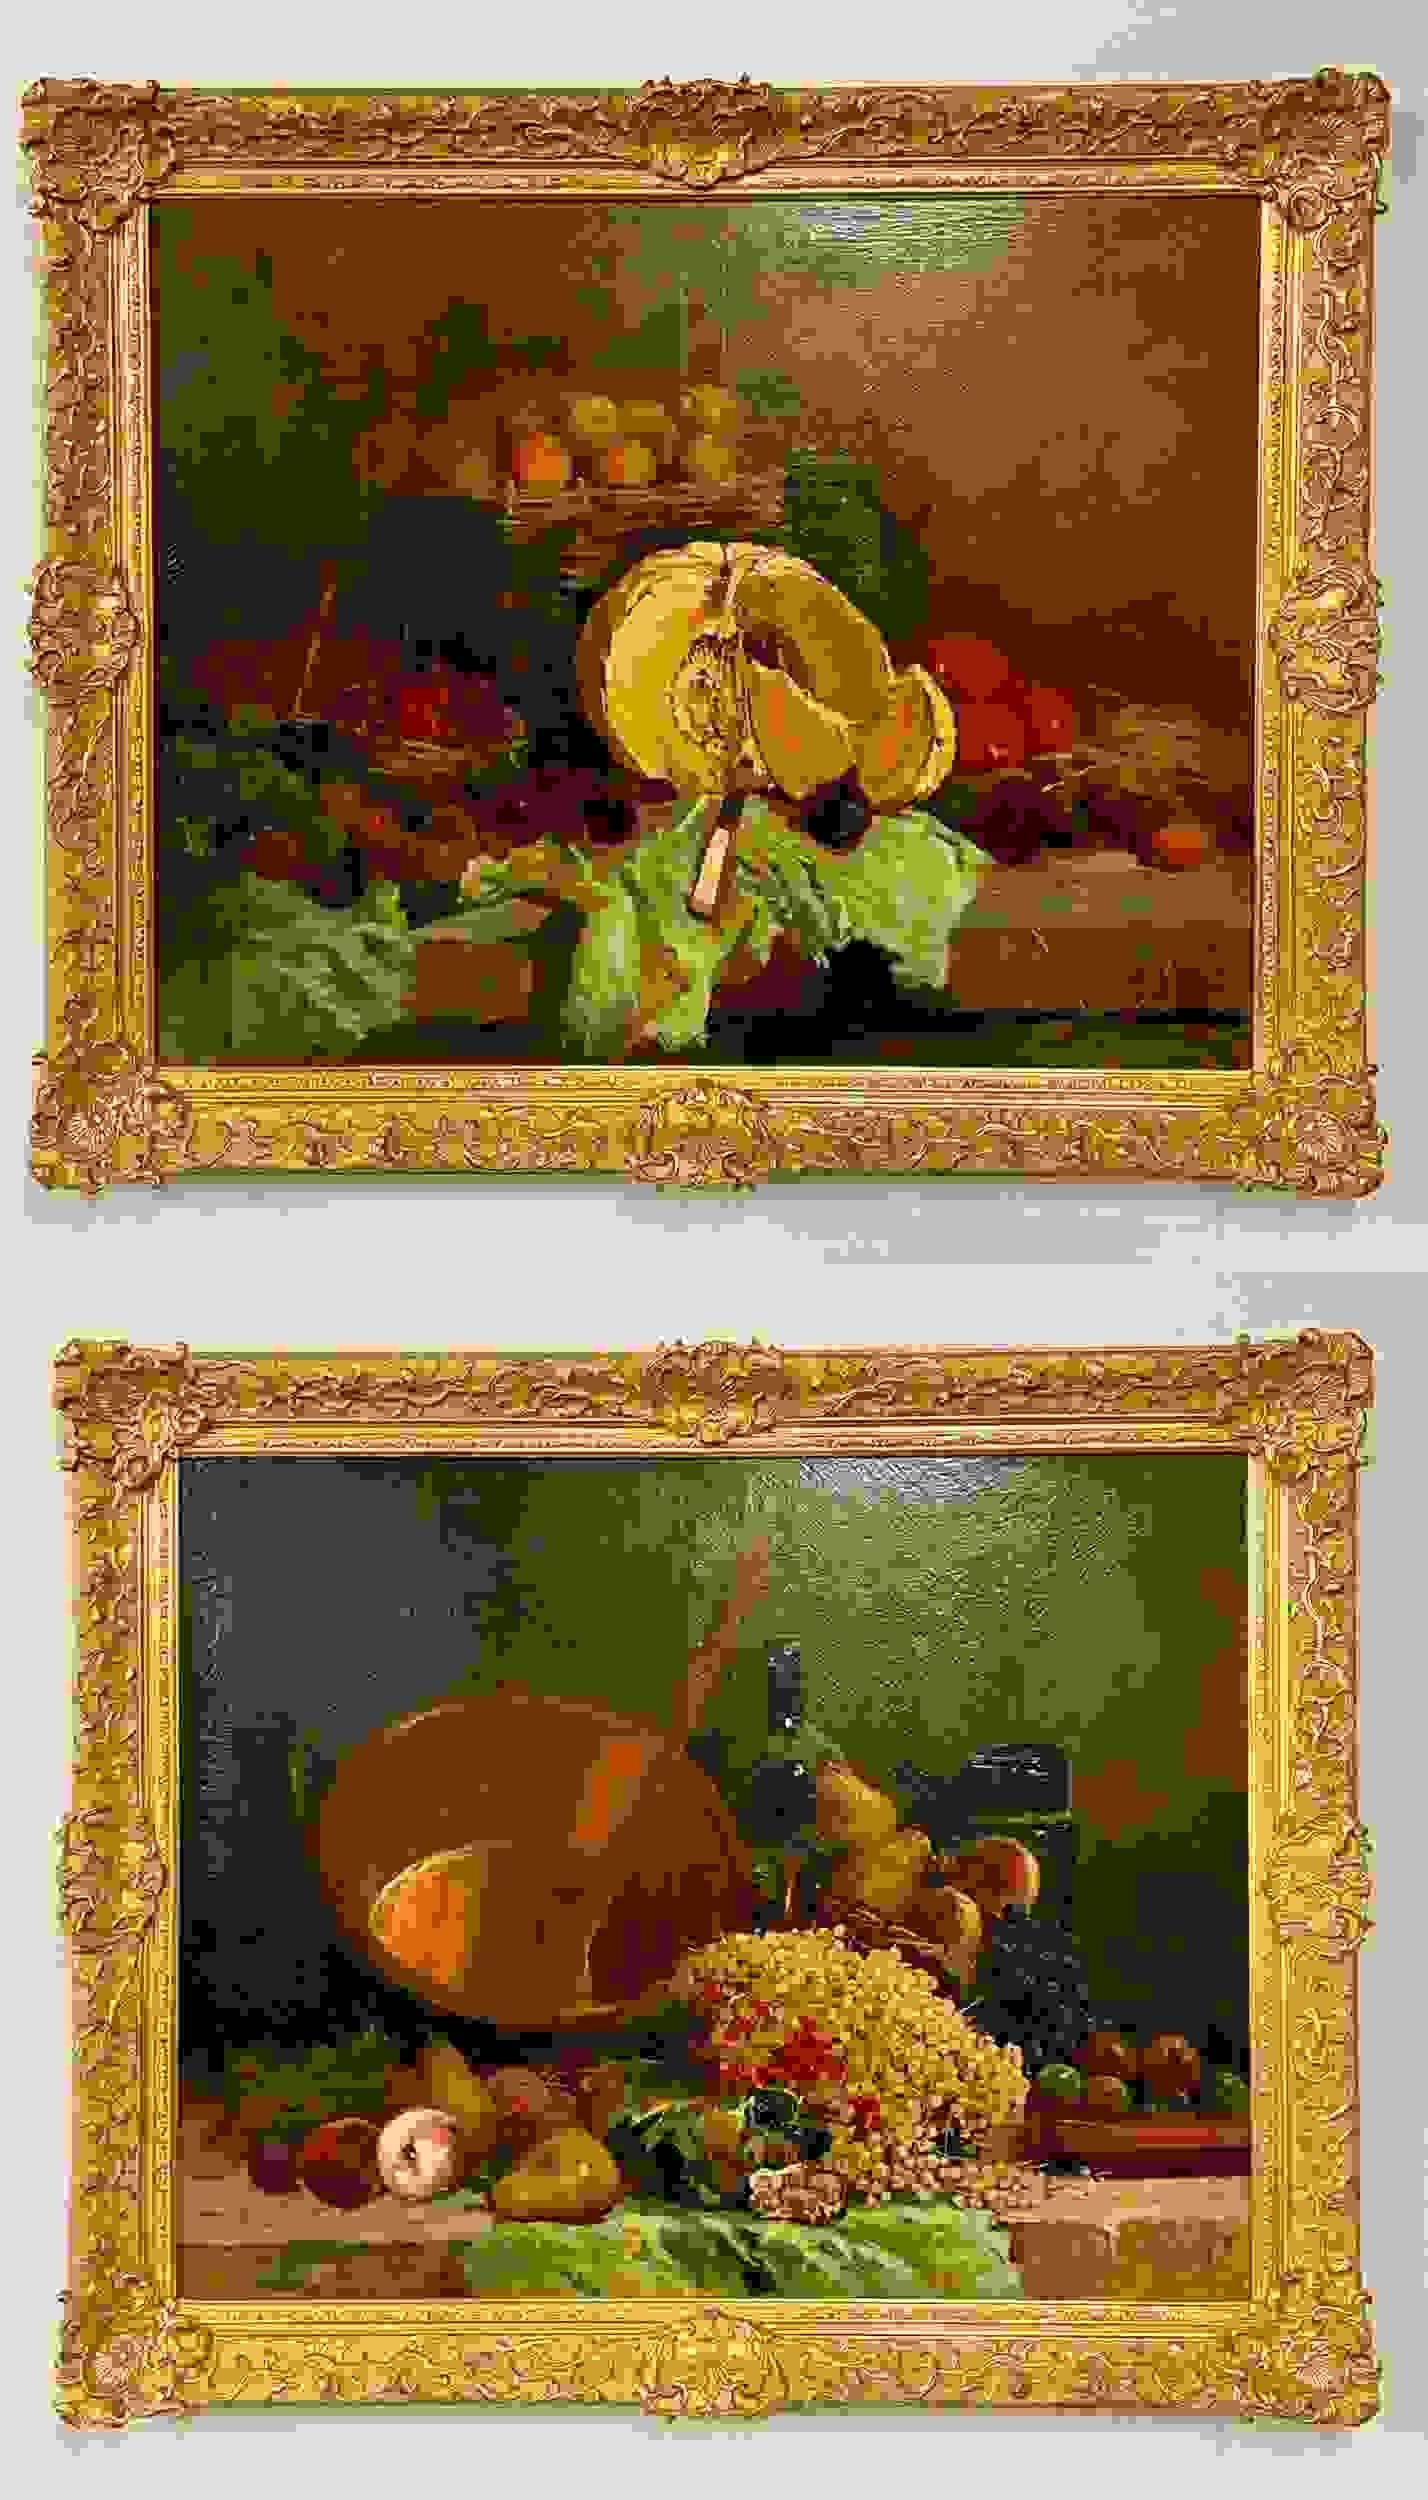 A pair of oil on canvas signed dated 1881 Tony Torta. Each finely detailed still-life of Fruit is so masterfully done that one would almost salivate to eat.
Can purchase one or the pair. Tony Torta (1800-1900)

Unframed: 29 in H x 36 in